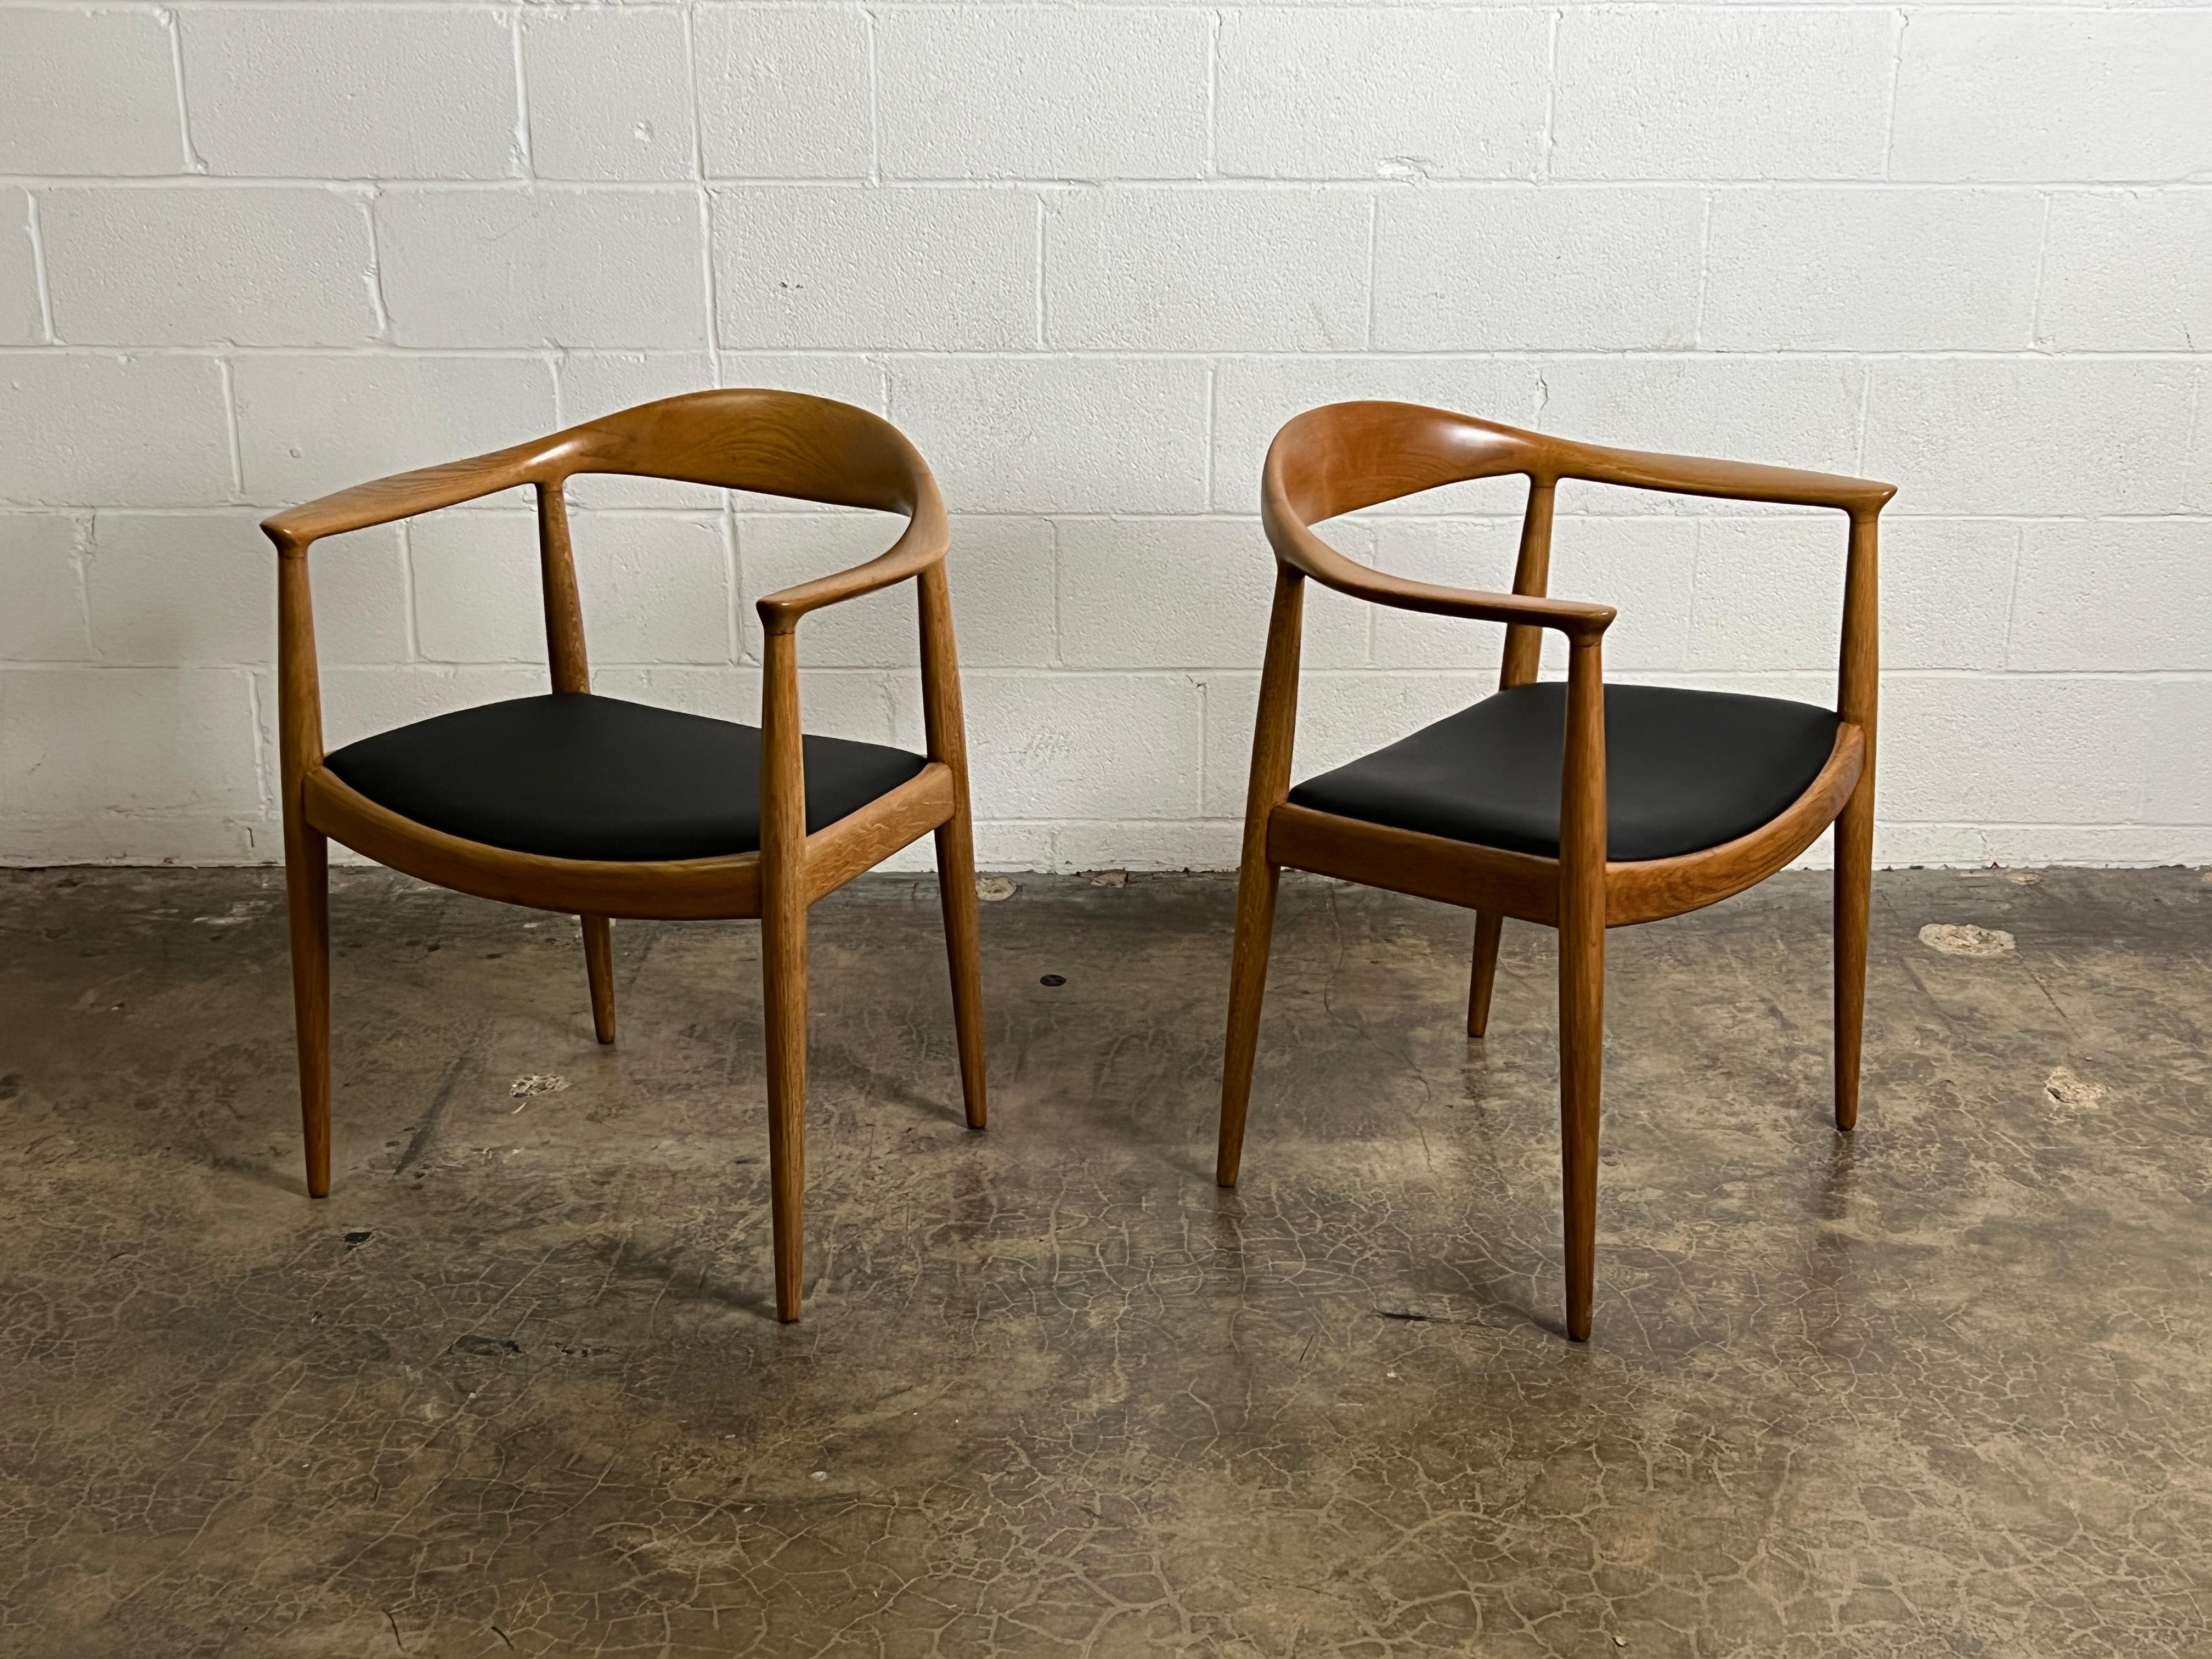 Pair of Oak Round Chairs by Hans Wegner In Good Condition For Sale In Dallas, TX